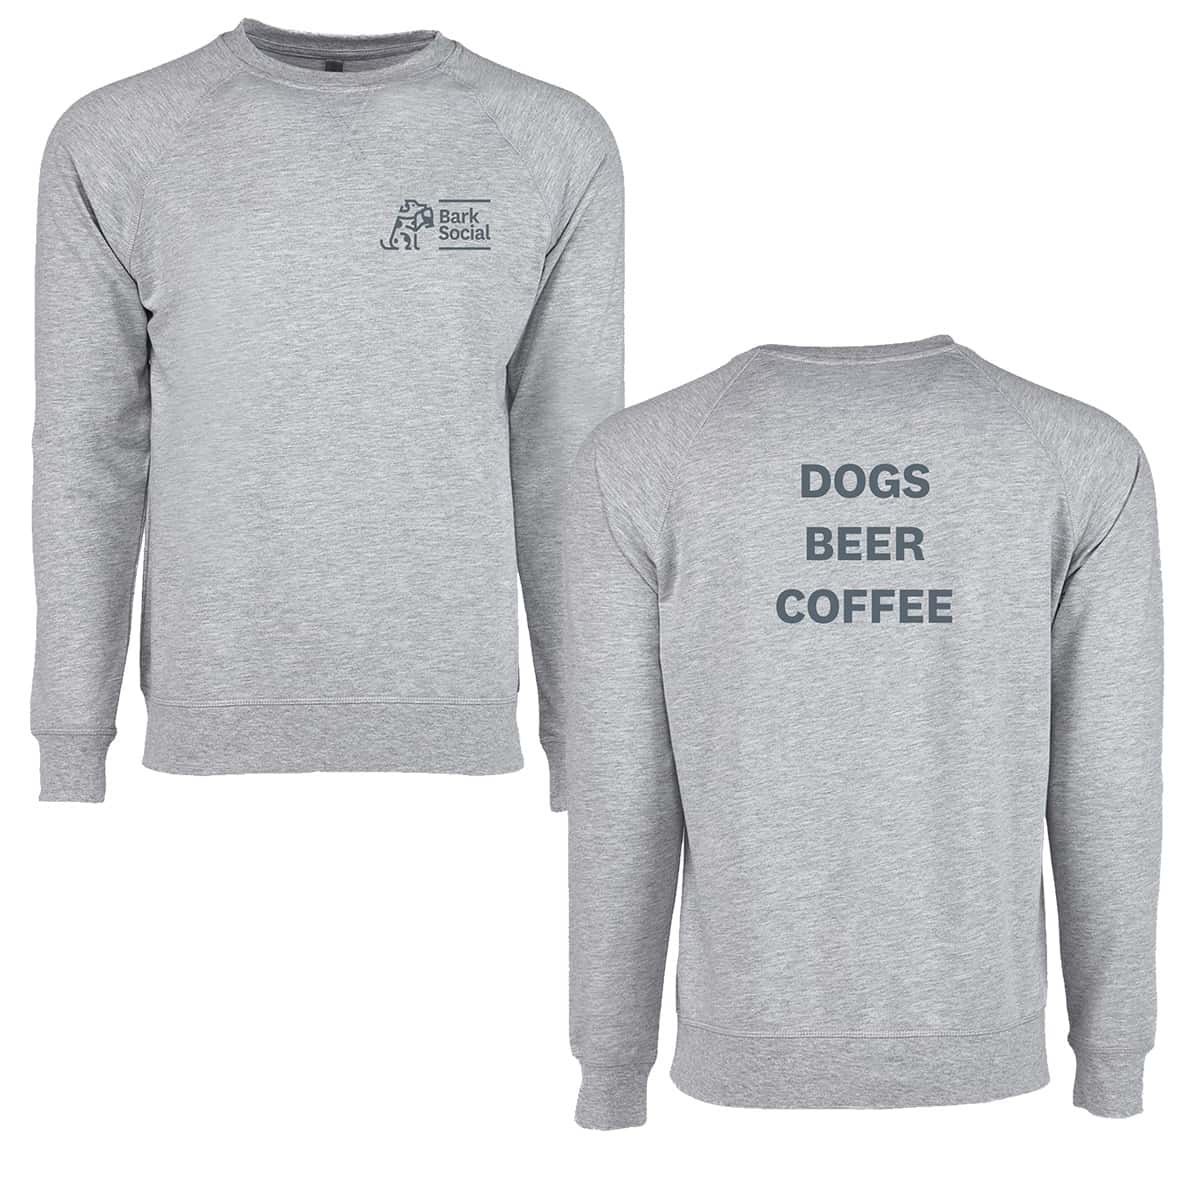 DOGS BEER COFFEE French Terry Raglan Crew Extra Small / Heather Grey Bark Social